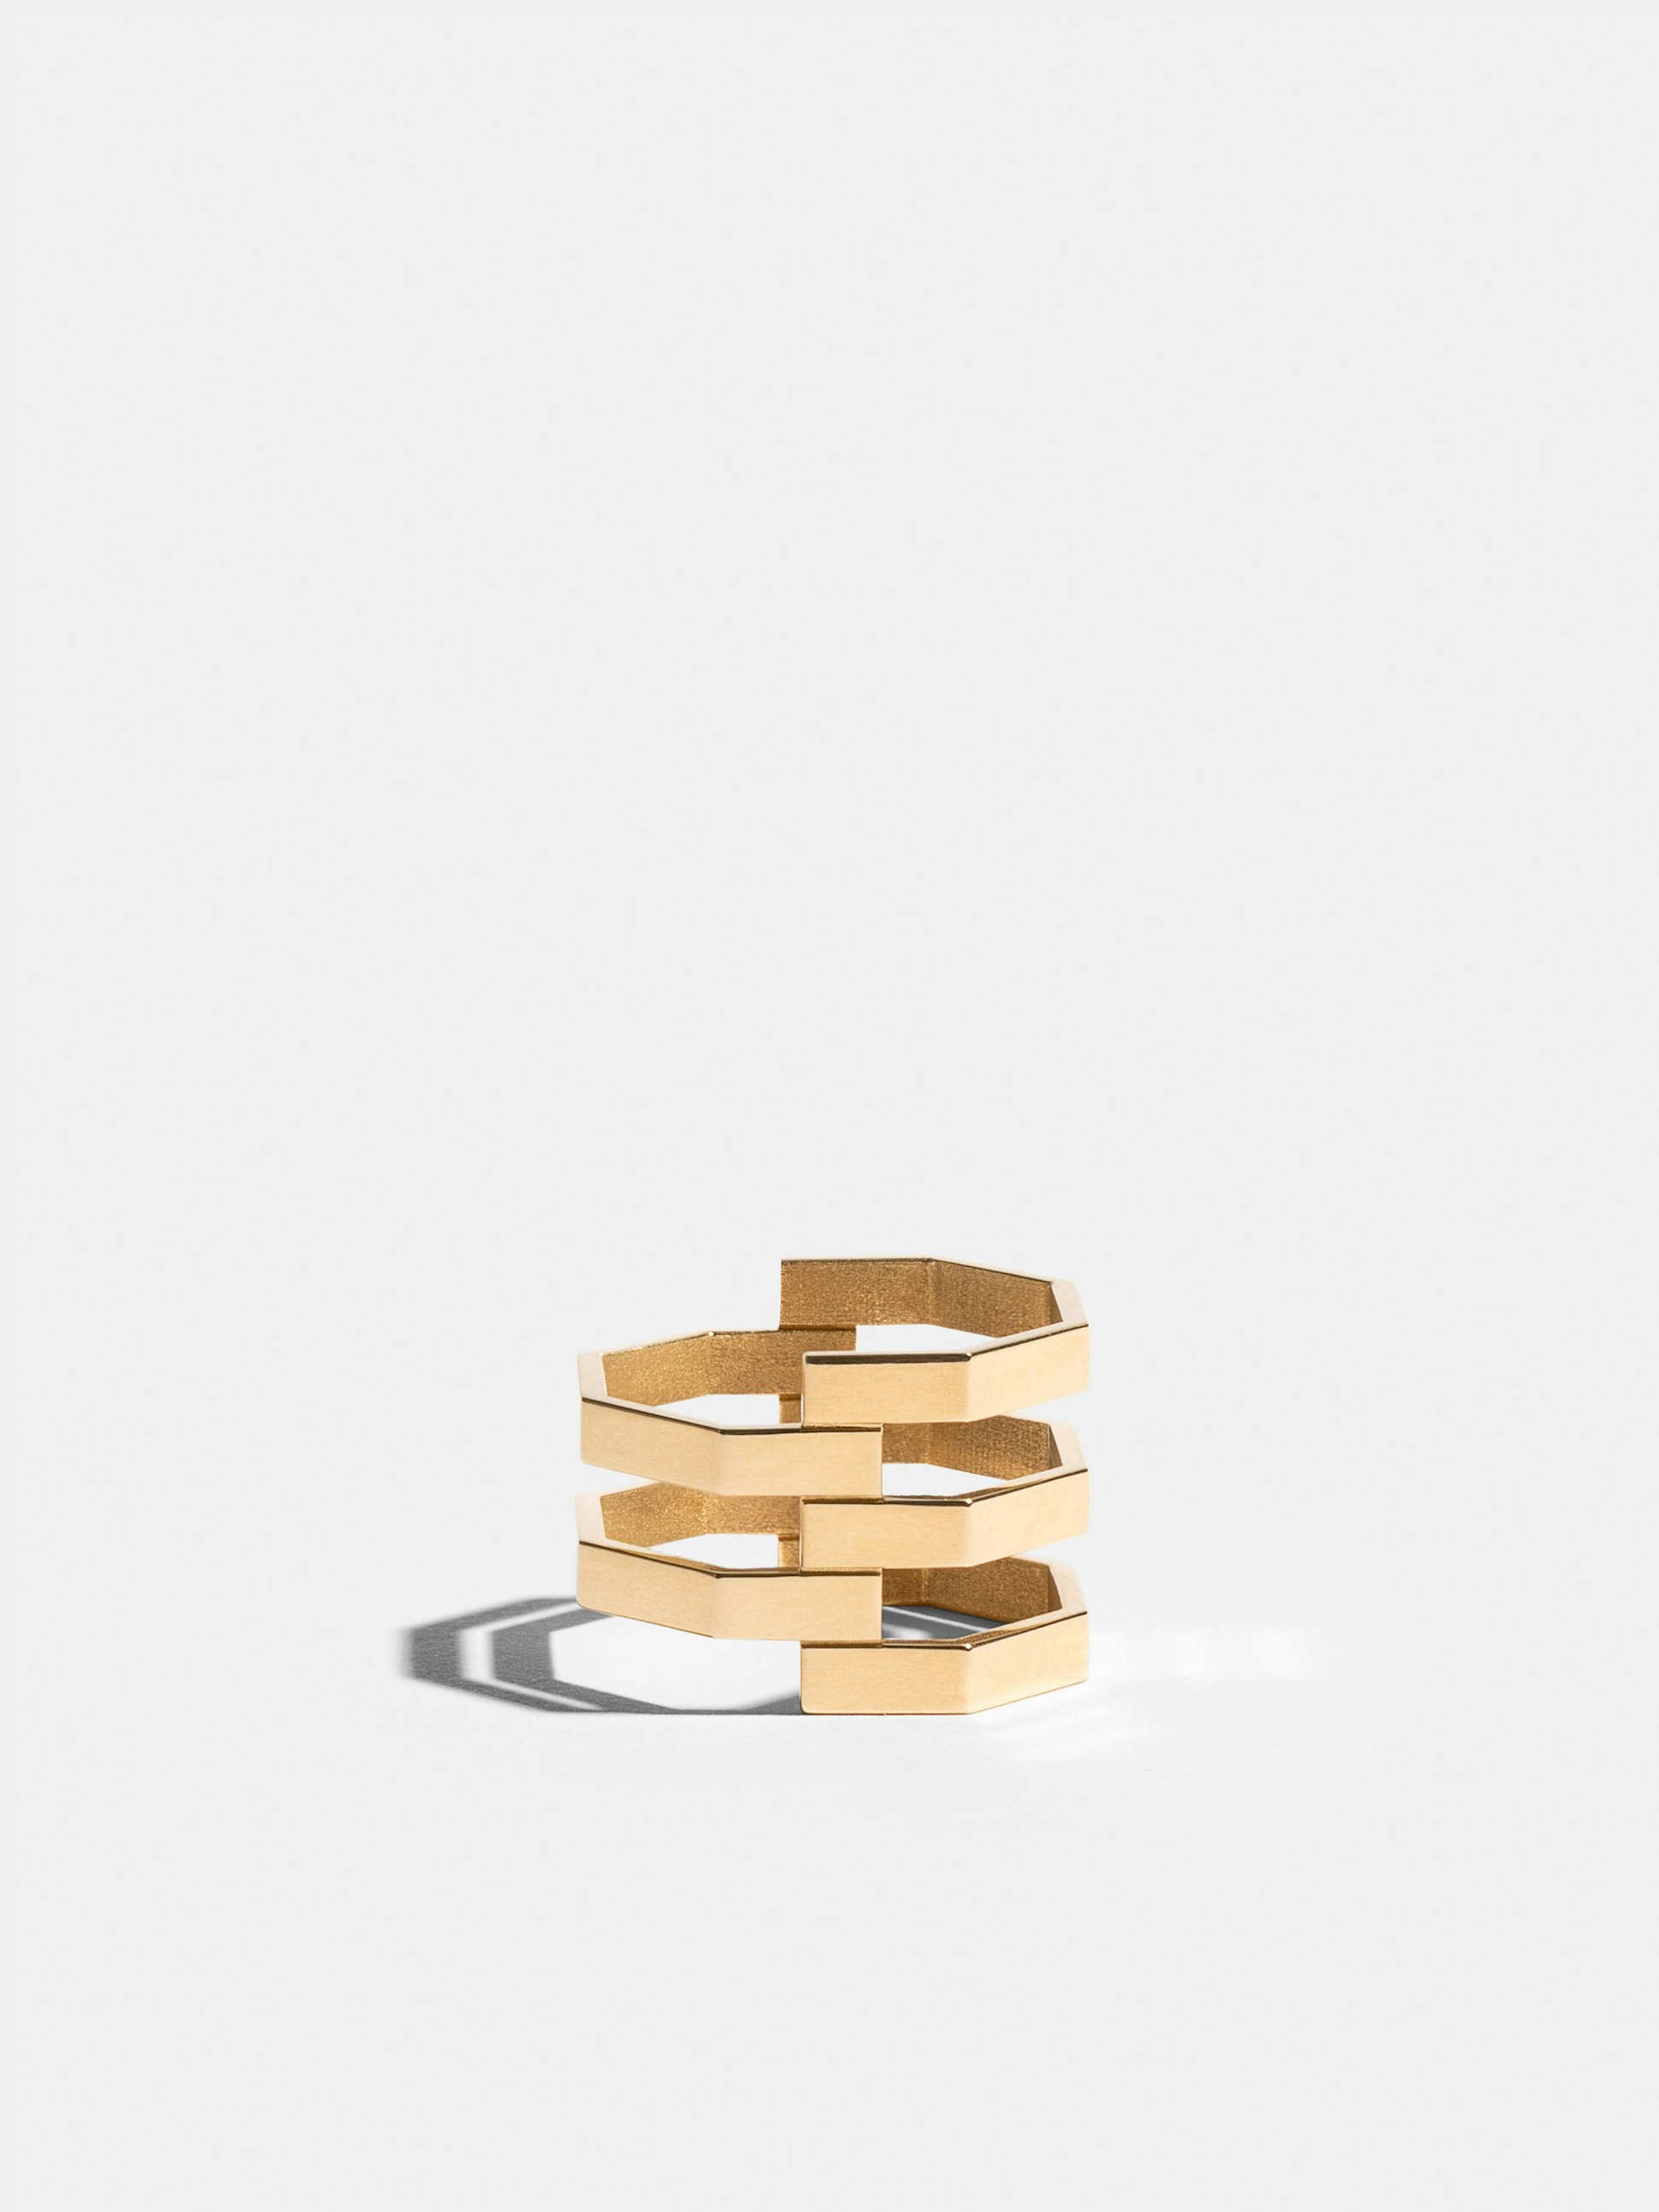 Octogone 5 ring in 18k Fairmined yellow ethical gold | JEM jewellery ethically minded